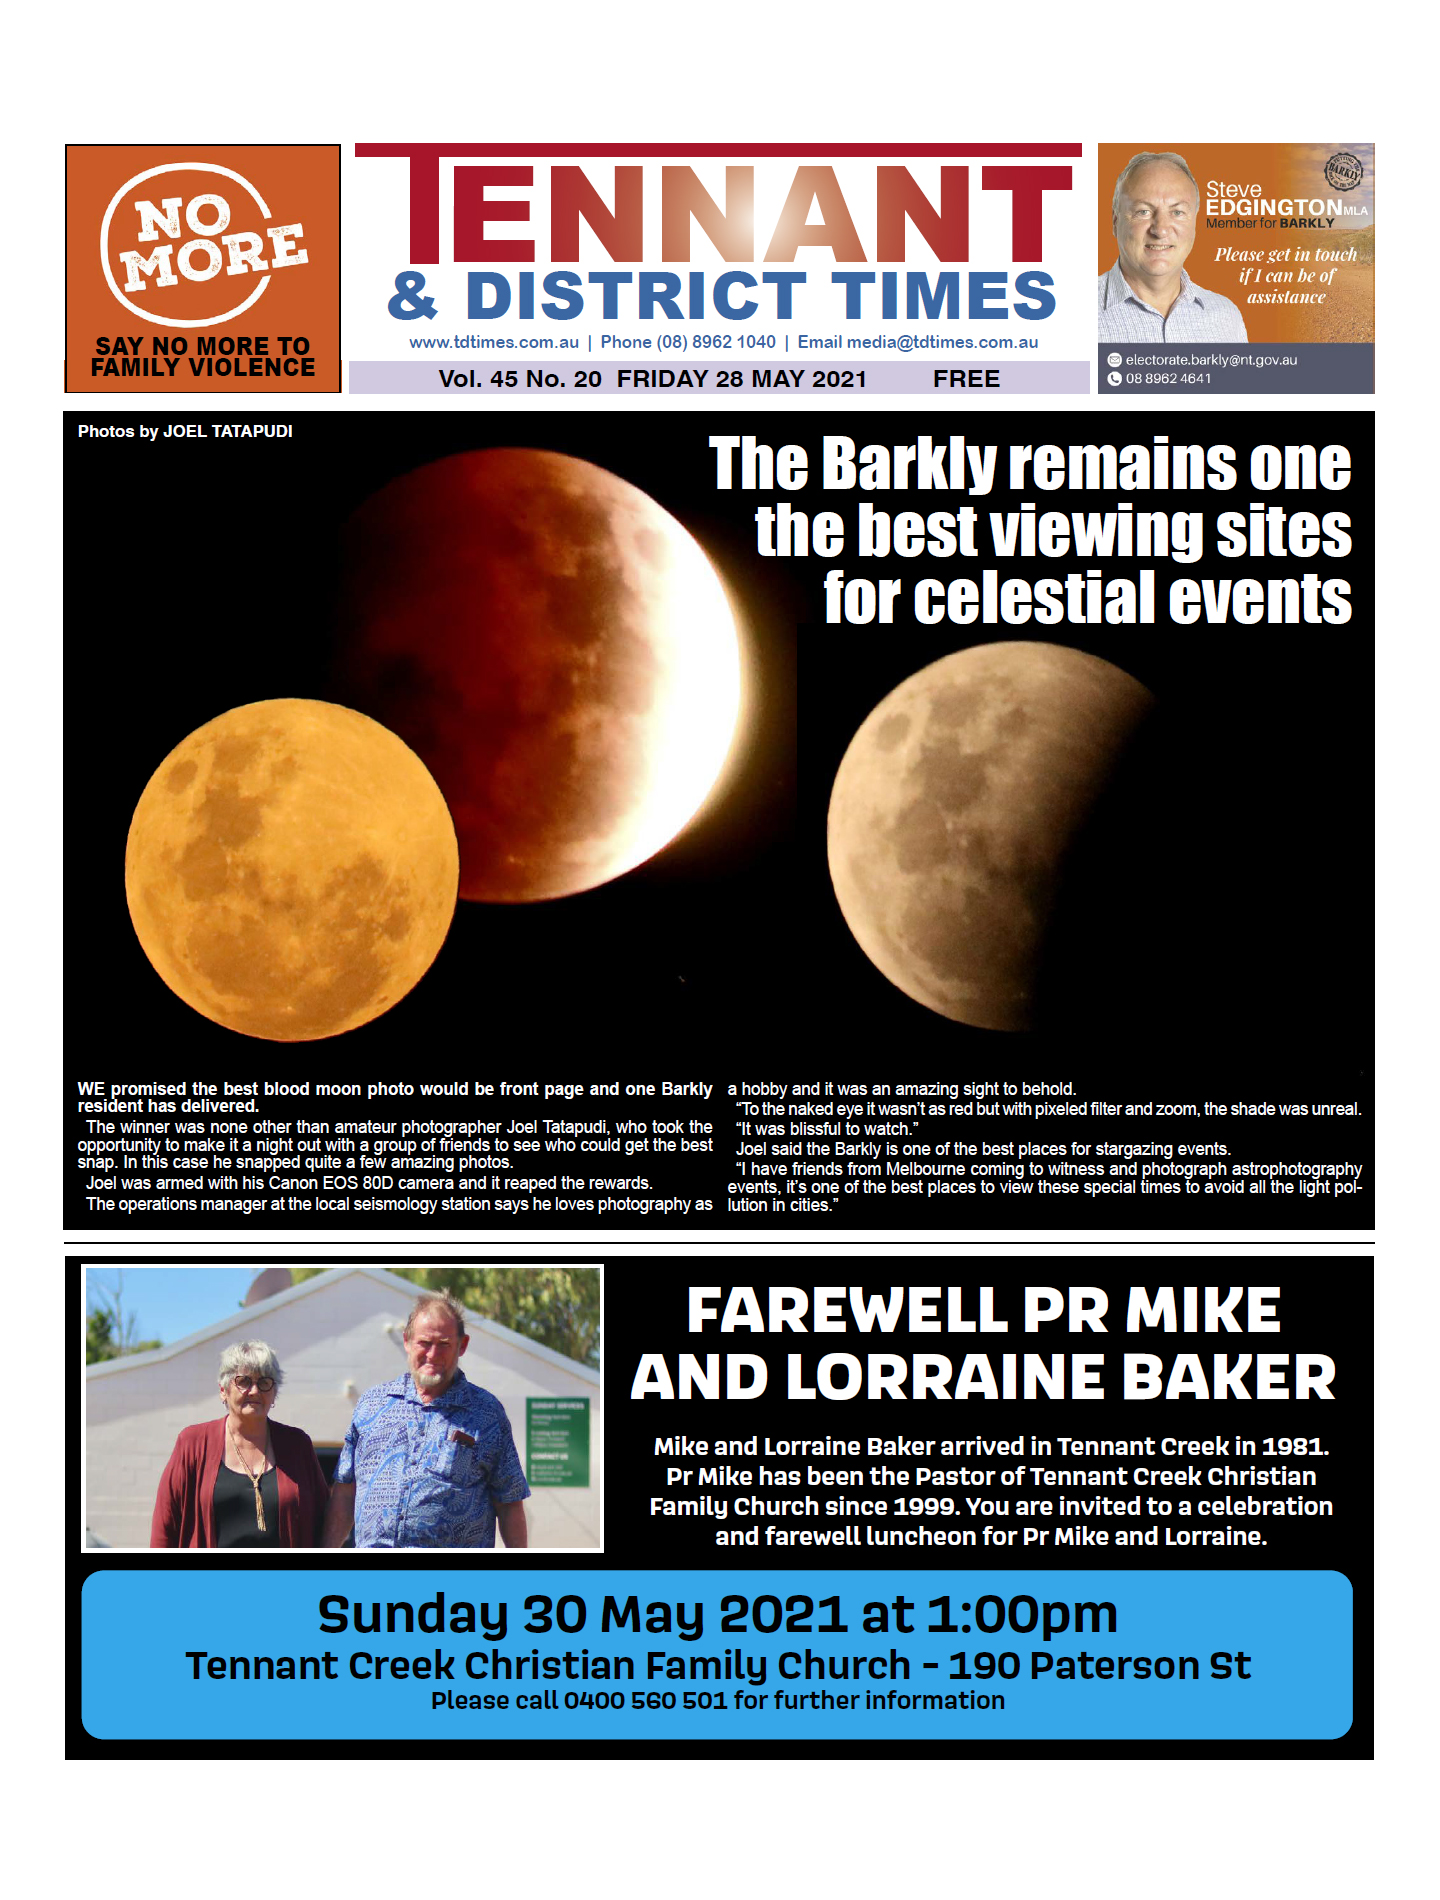 Tennant and District Times 28 May 2021